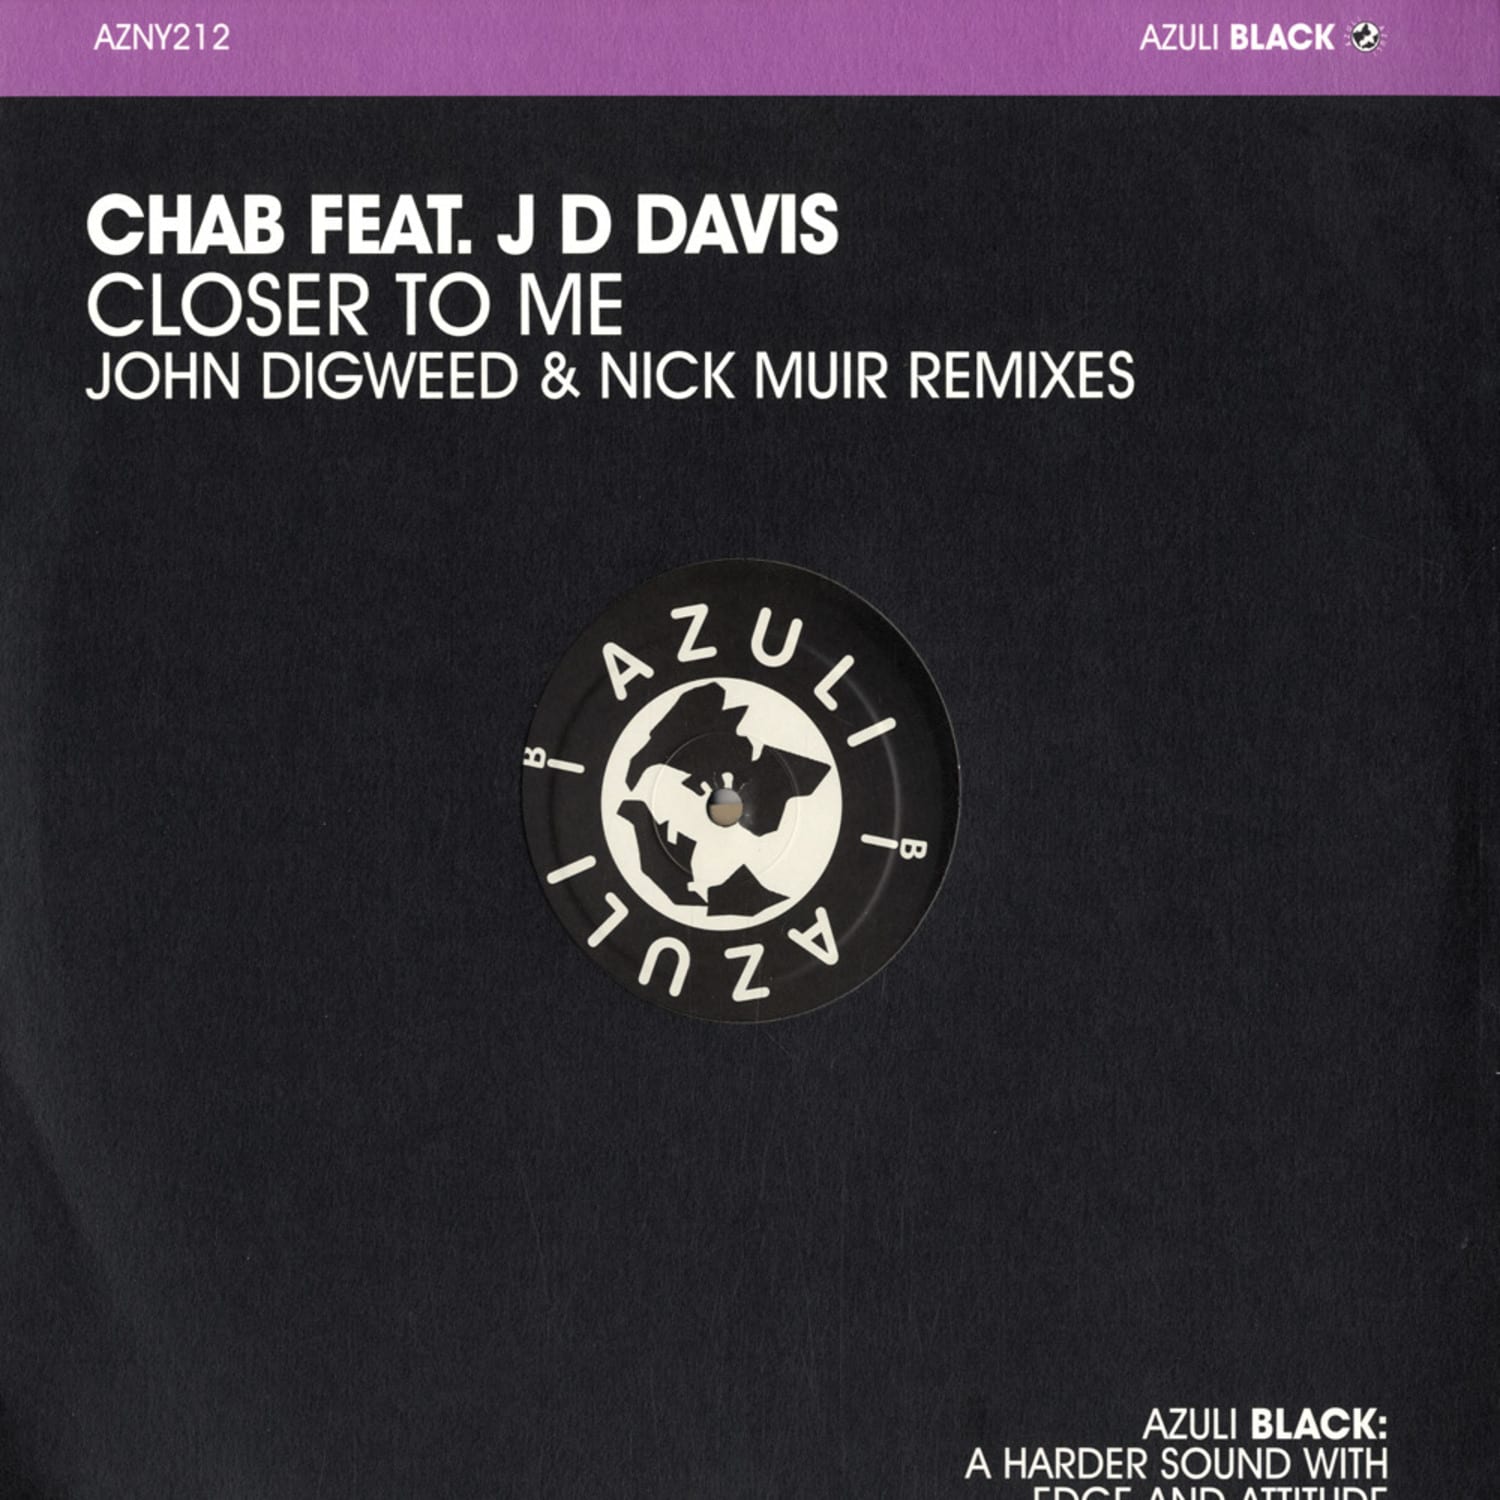 Chab - CLOSER TO ME 